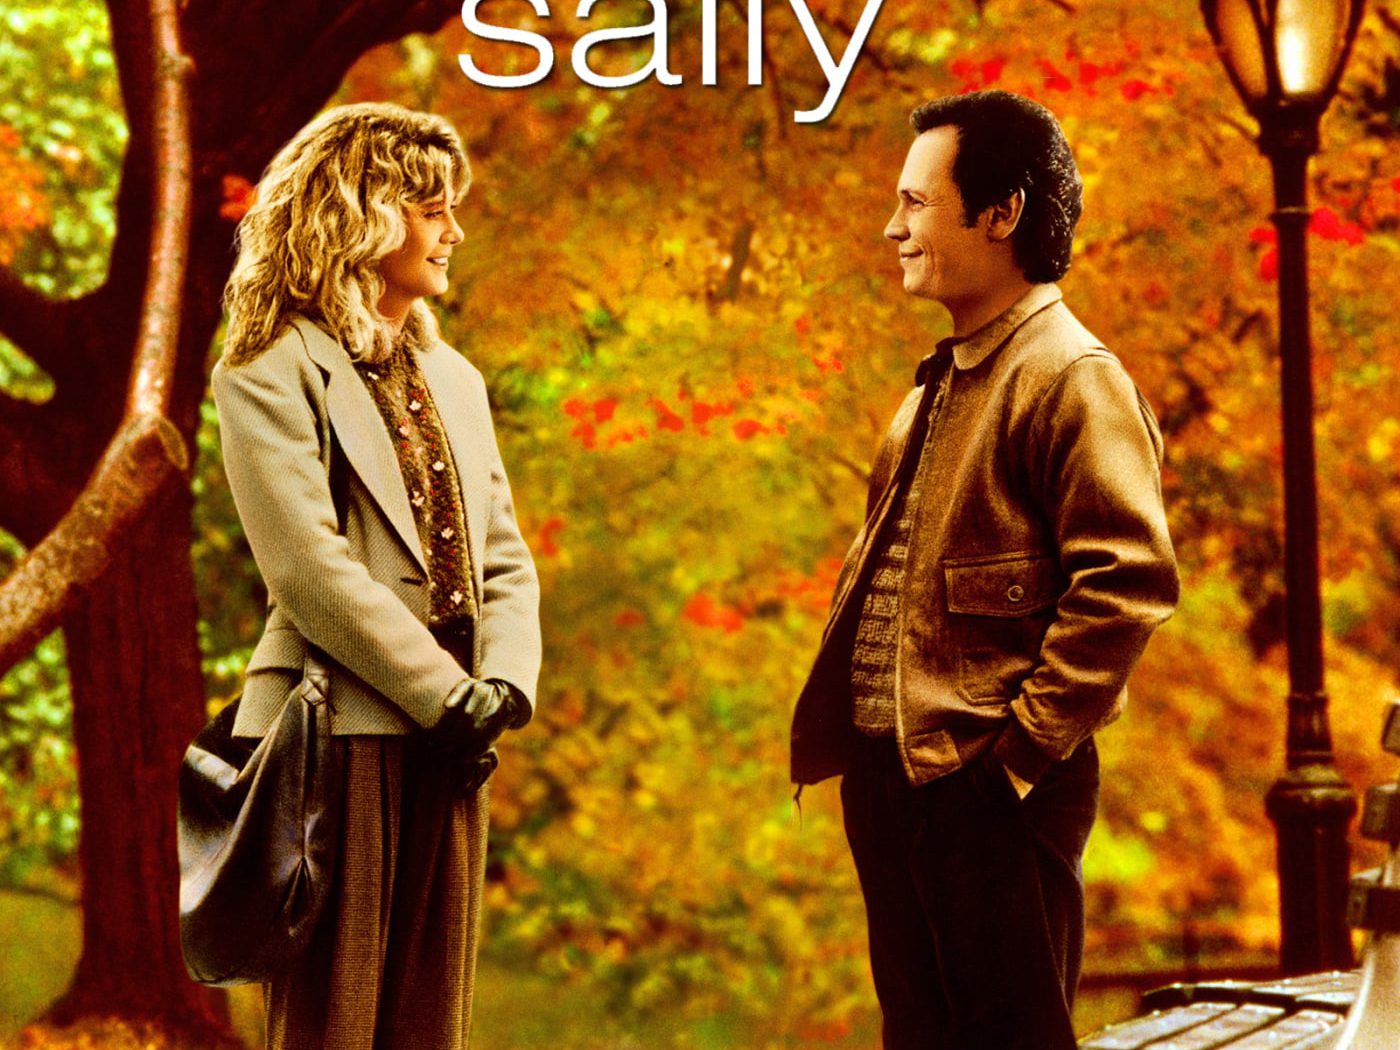 Poster for the movie "When Harry Met Sally..."